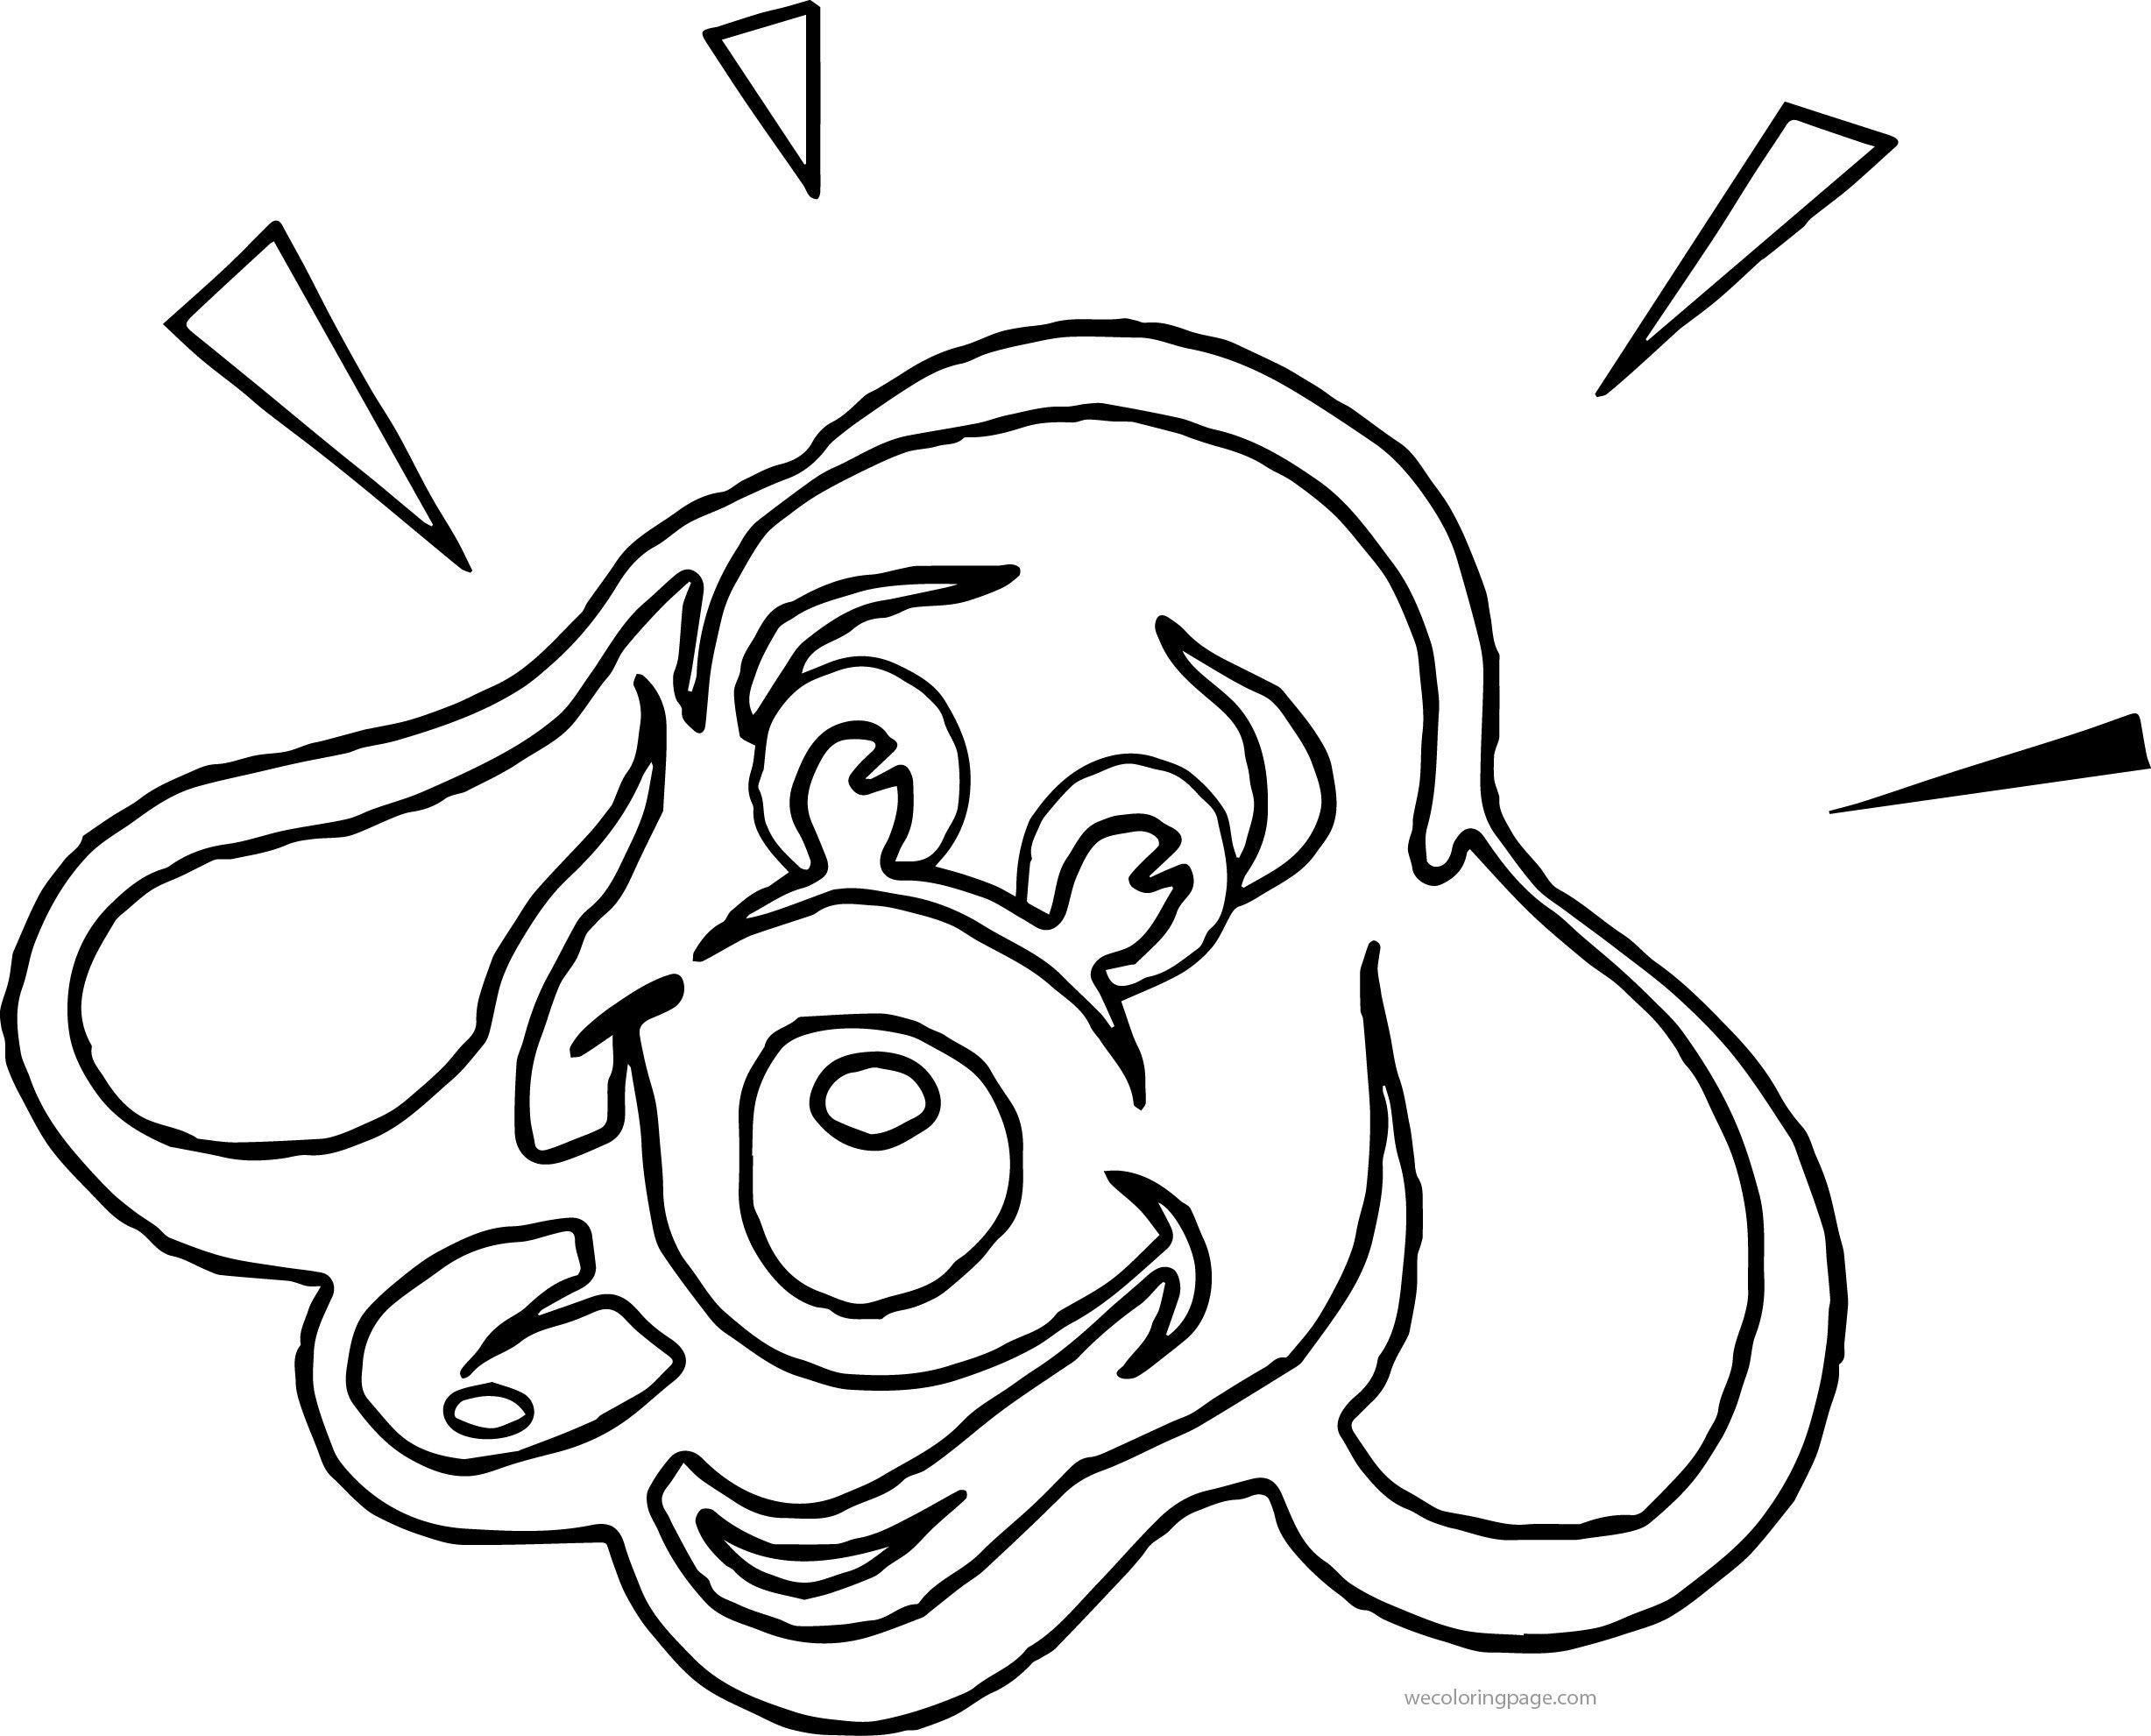 Happy Dog Face Coloring Page | Wecoloringpage